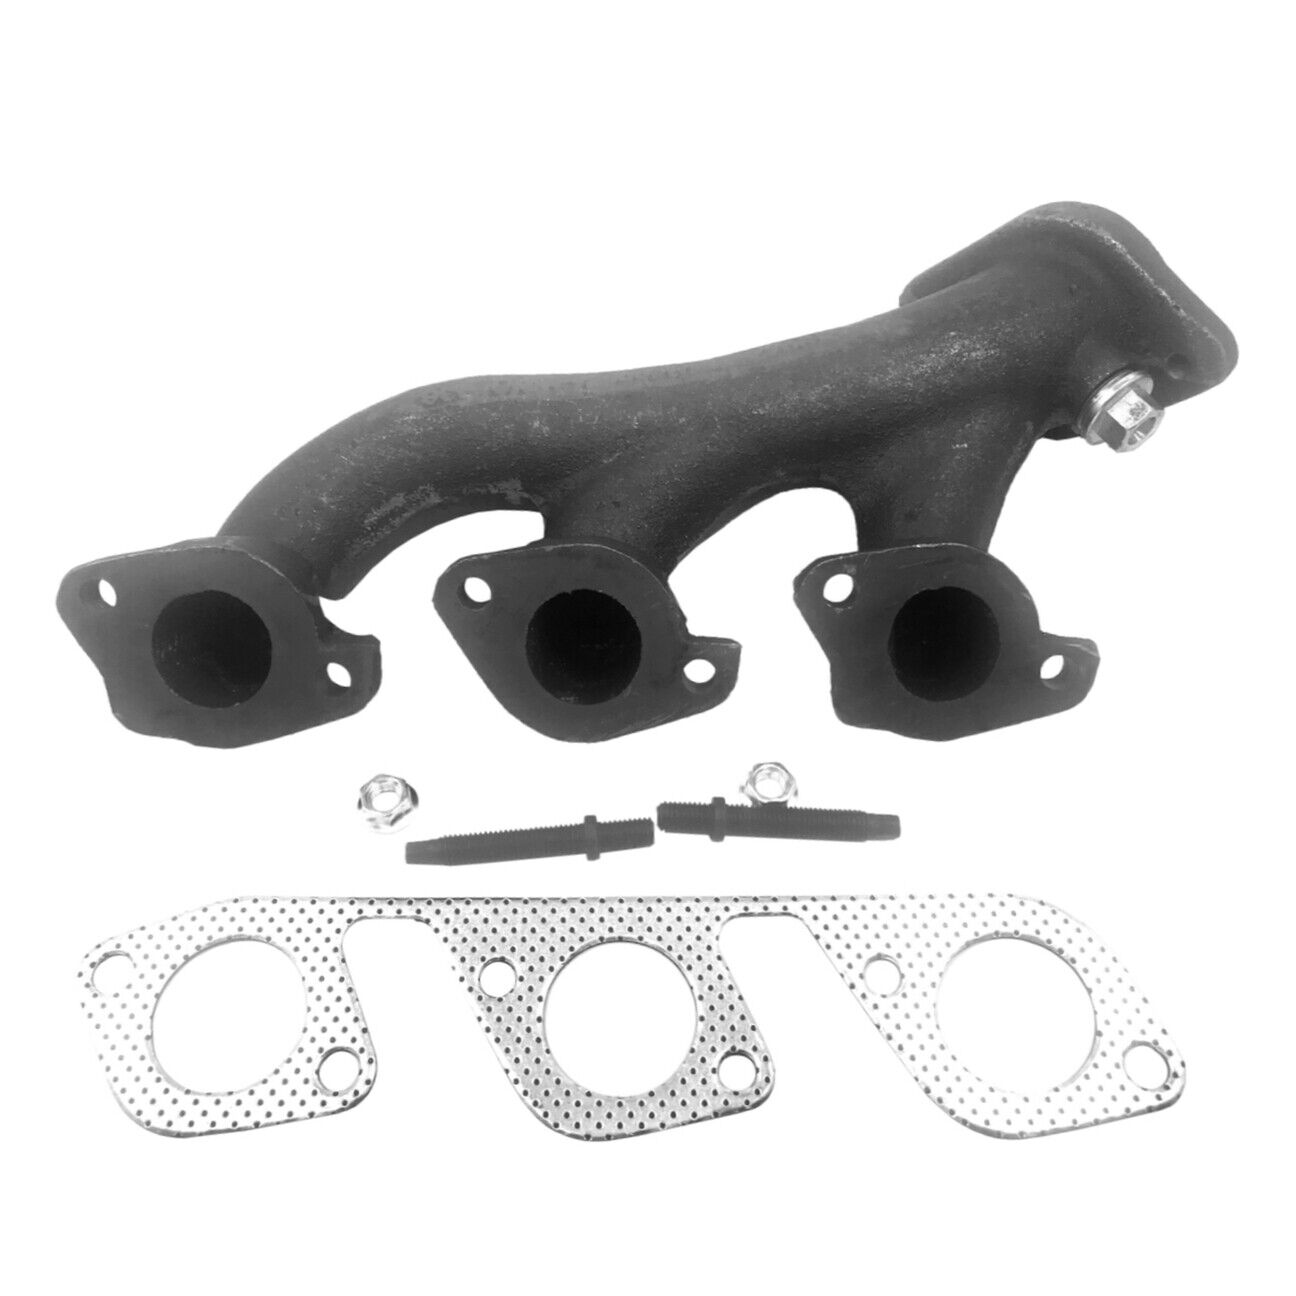 Left Exhaust Manifold For 1999-2008 Ford F150 Heritage E150 Econoline Club Wagon